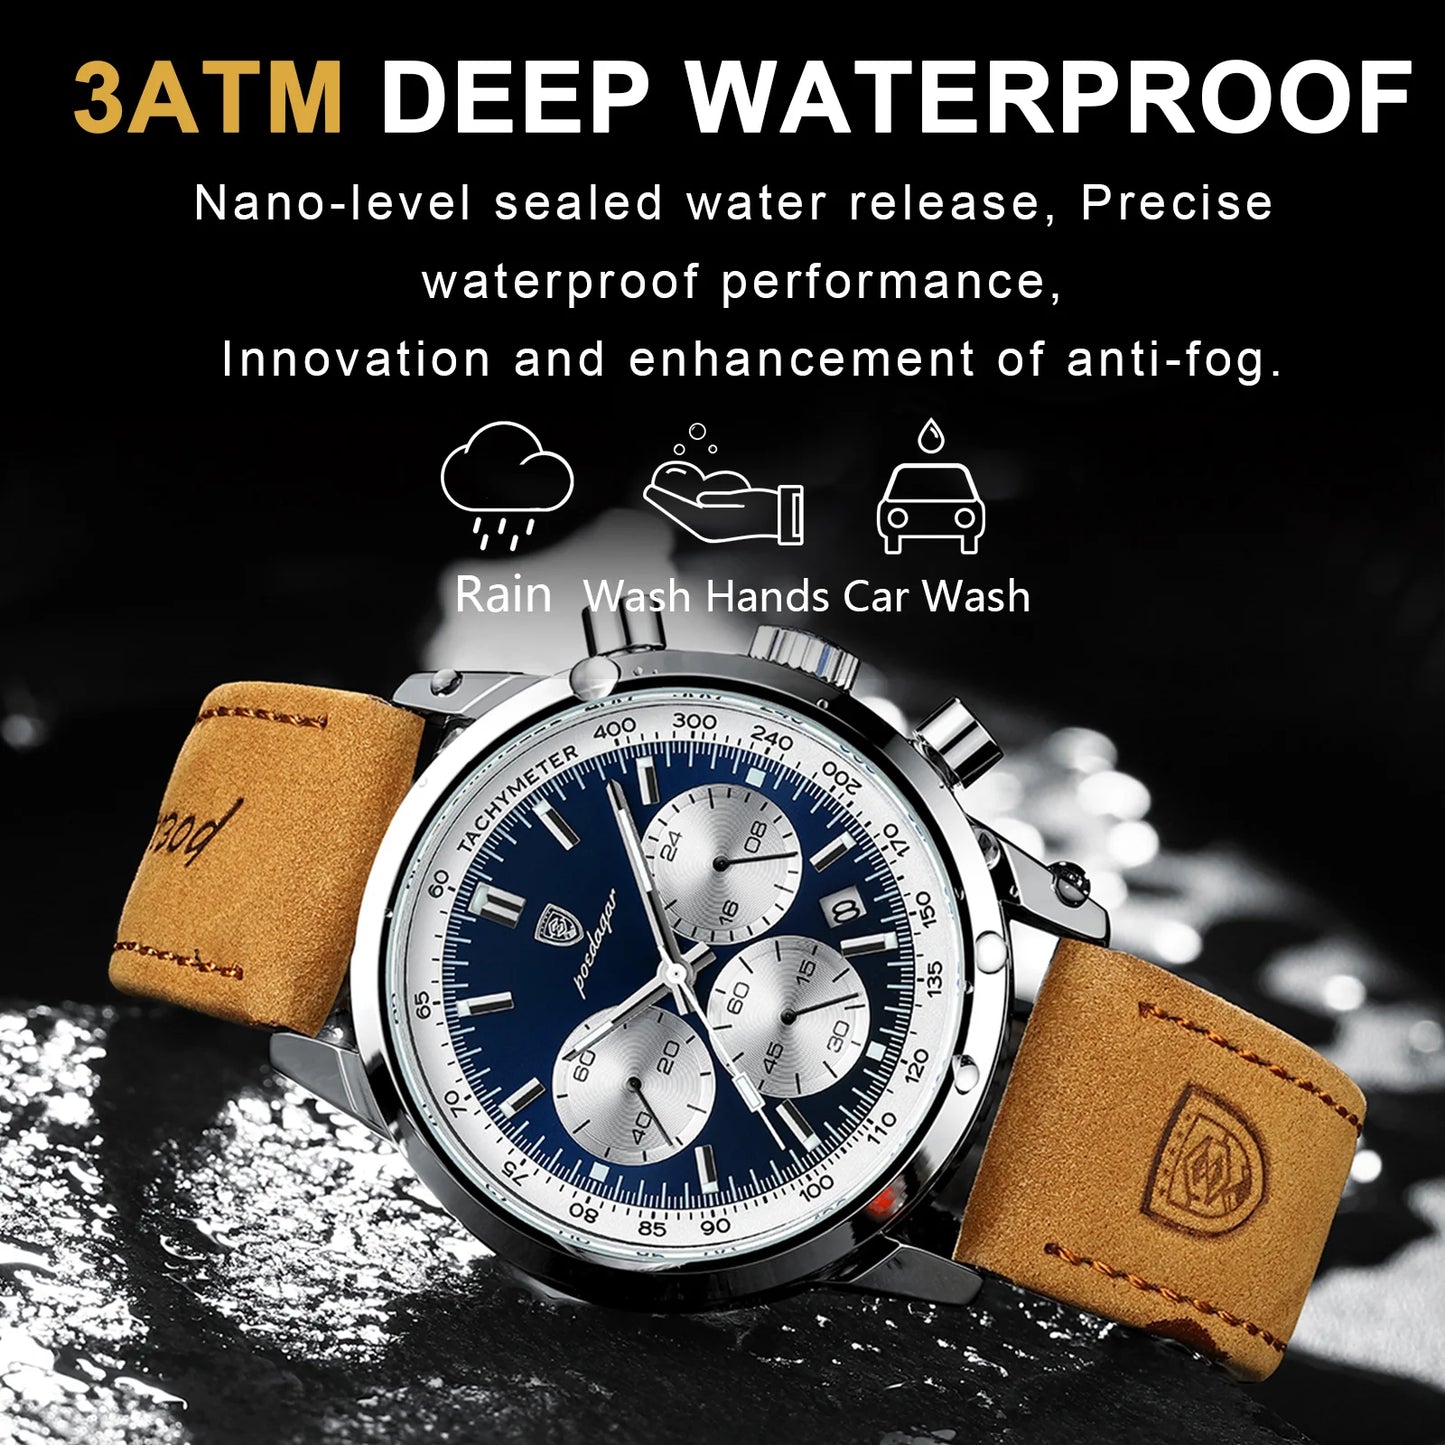 Watch "Quartz wristwatch with luminous display, auto date, chronograph, and complete calendar features. Leather band, stainless steel case, scratch-resistant Hardlex window."